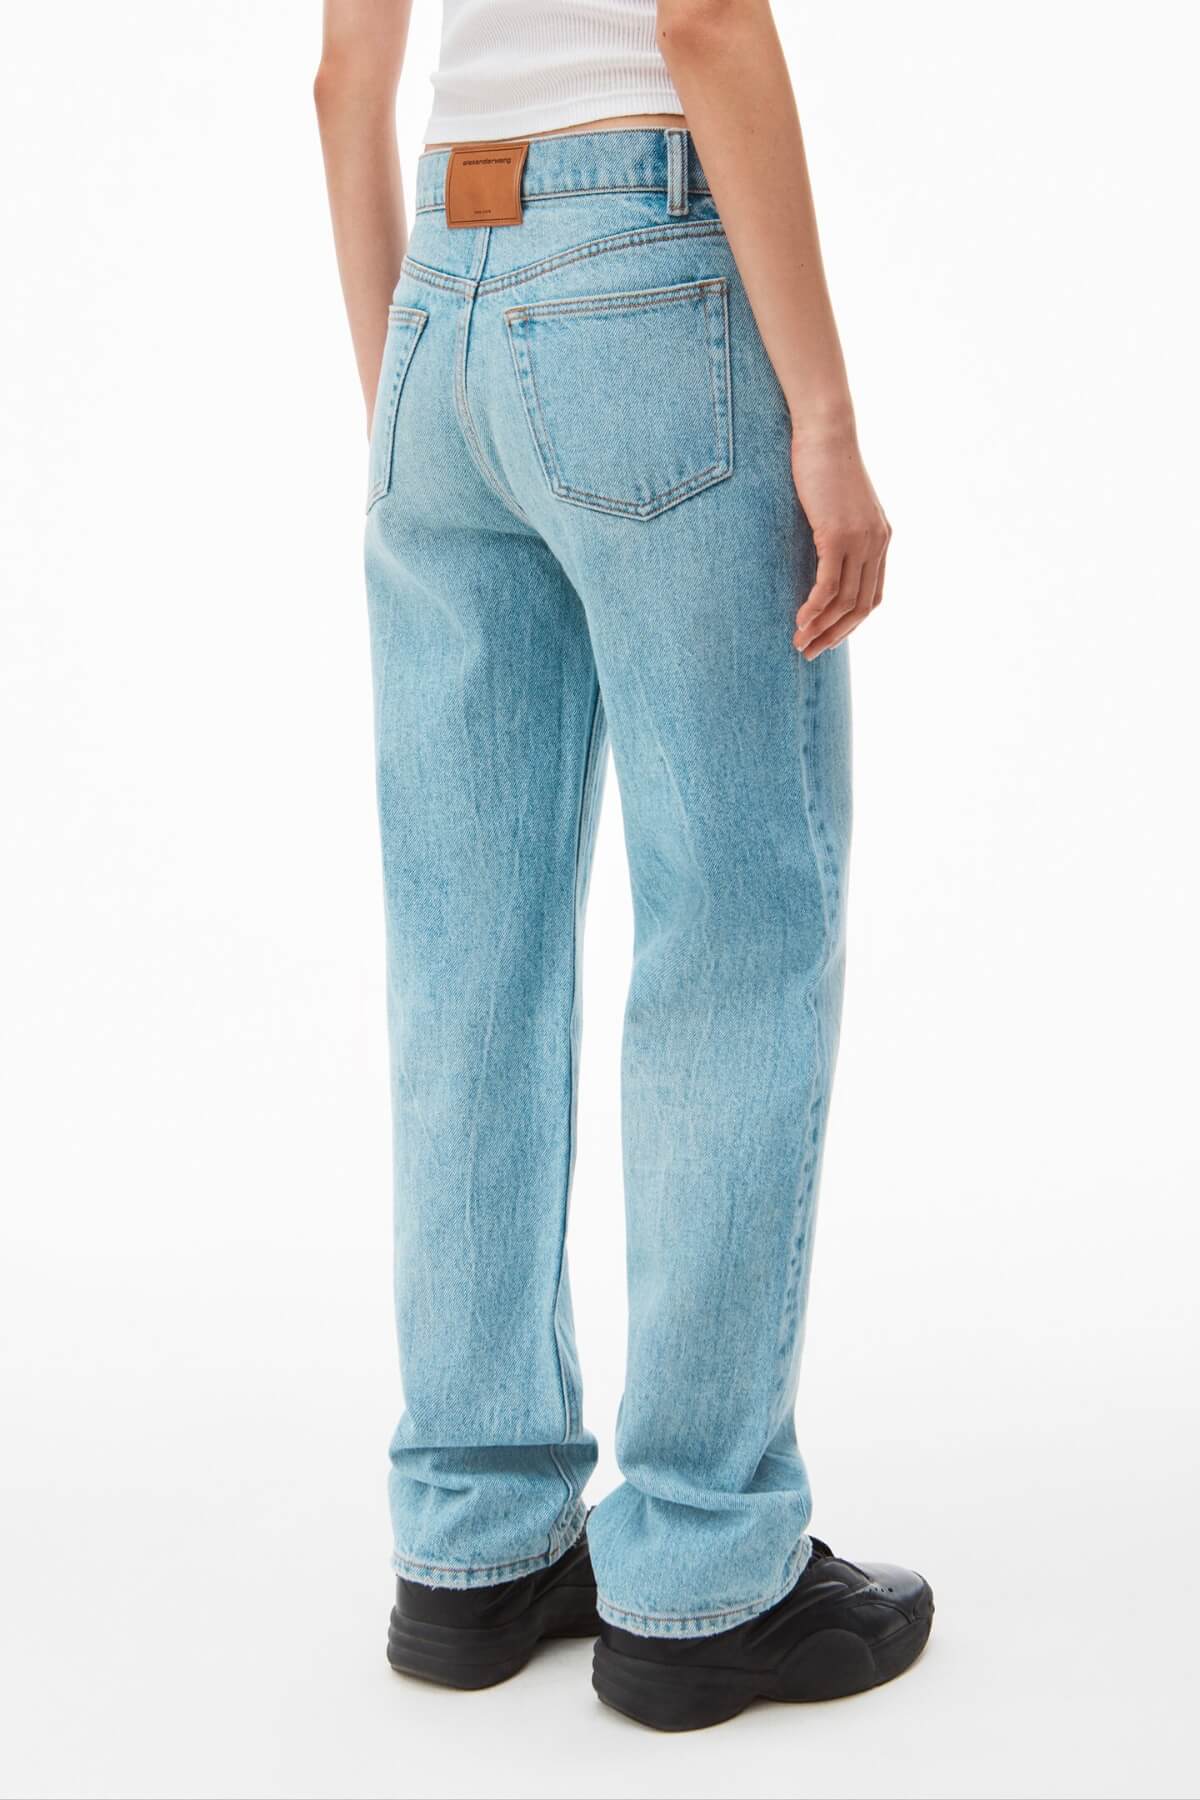 Alexander Wang EZ Mid Rise Relaxed Straight Jeans - Vintage Faded Indigo